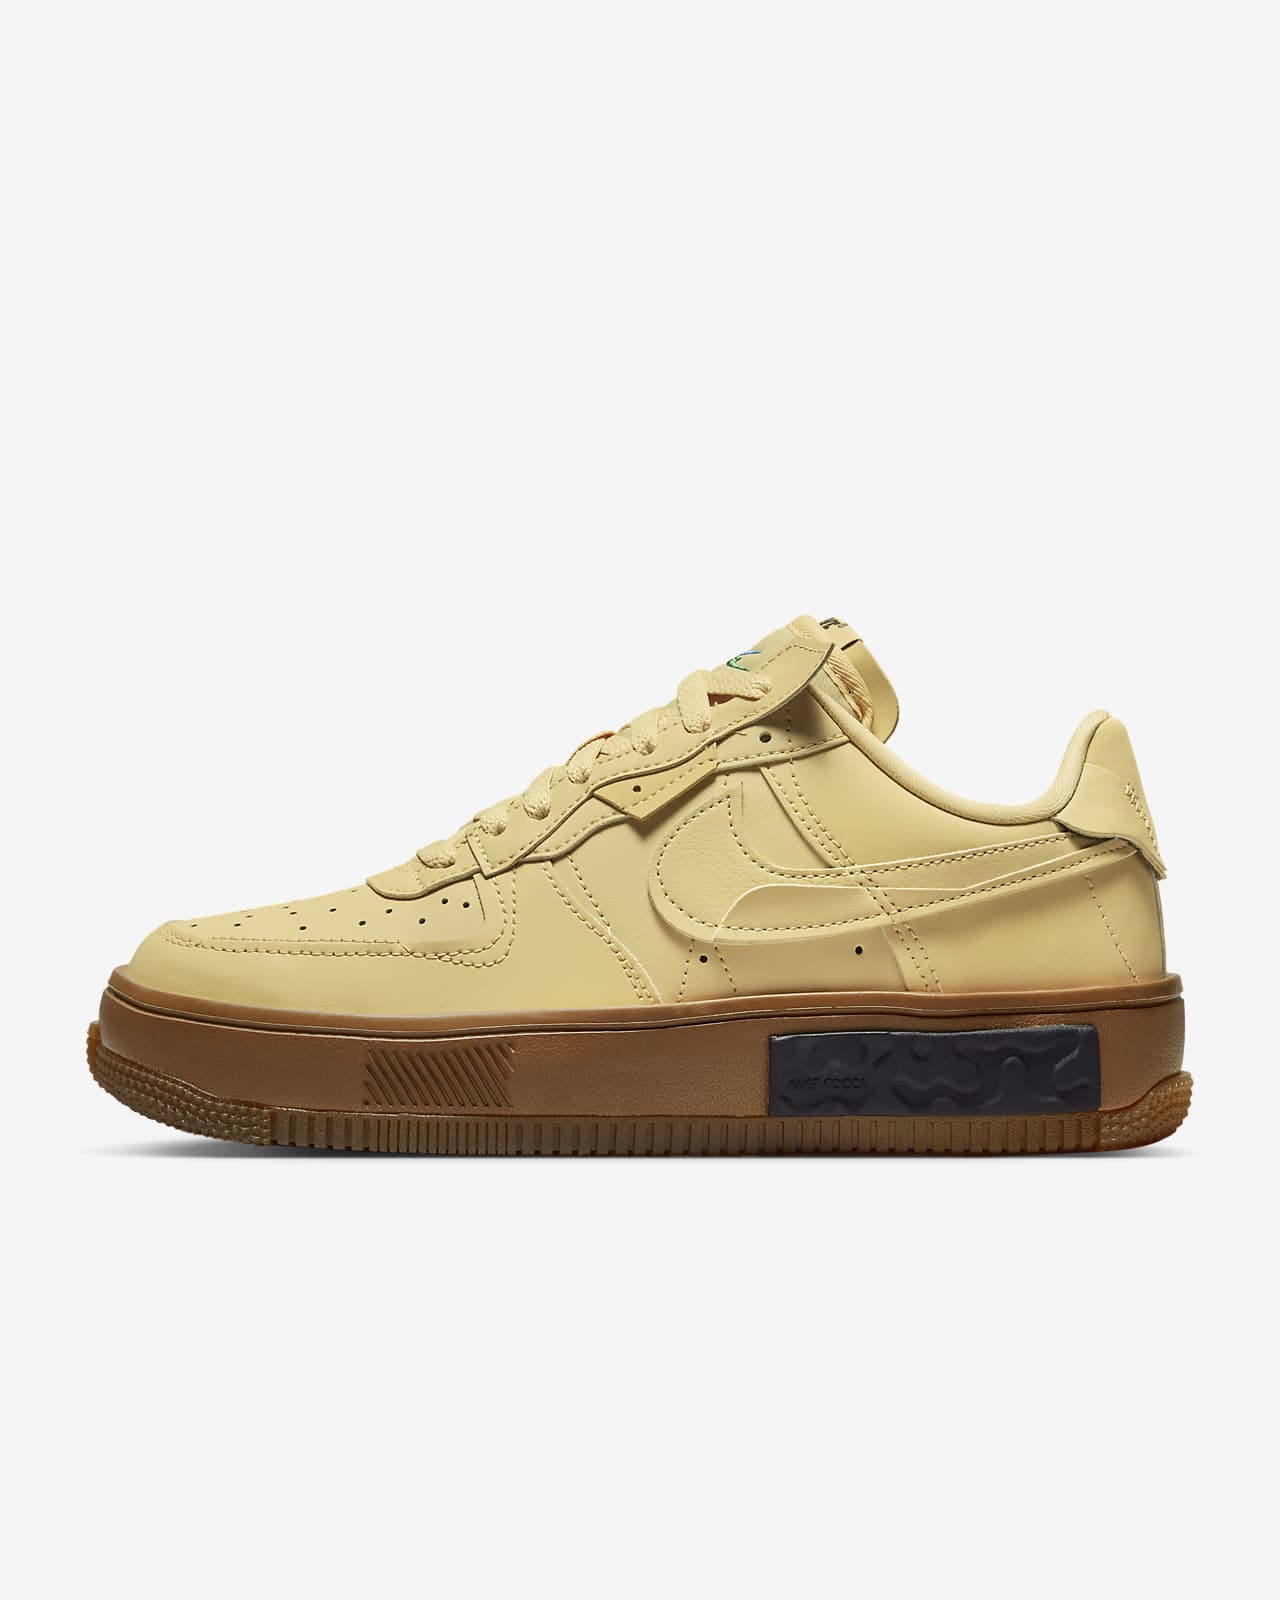 Nike Air Force 1 Women's Shoes.